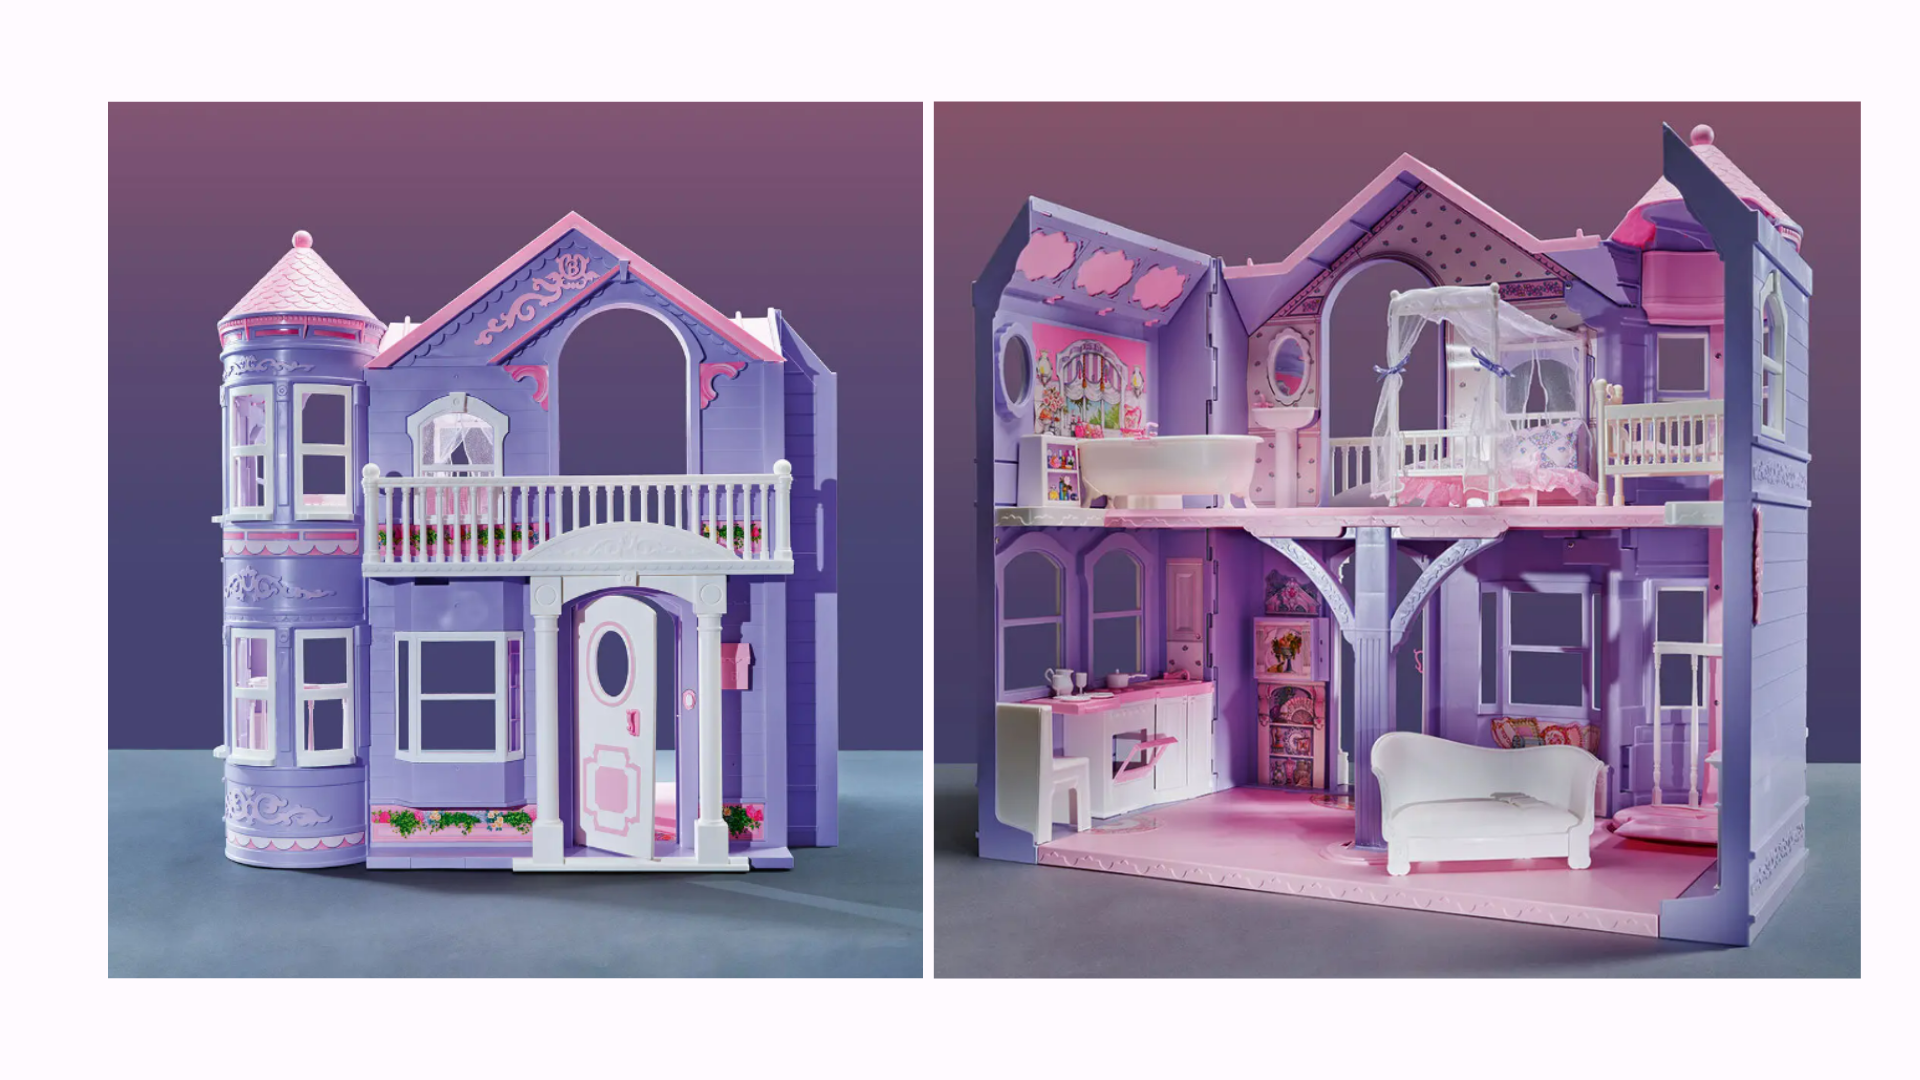 interior and exterior of a pink and purple Victorian-styled doll house